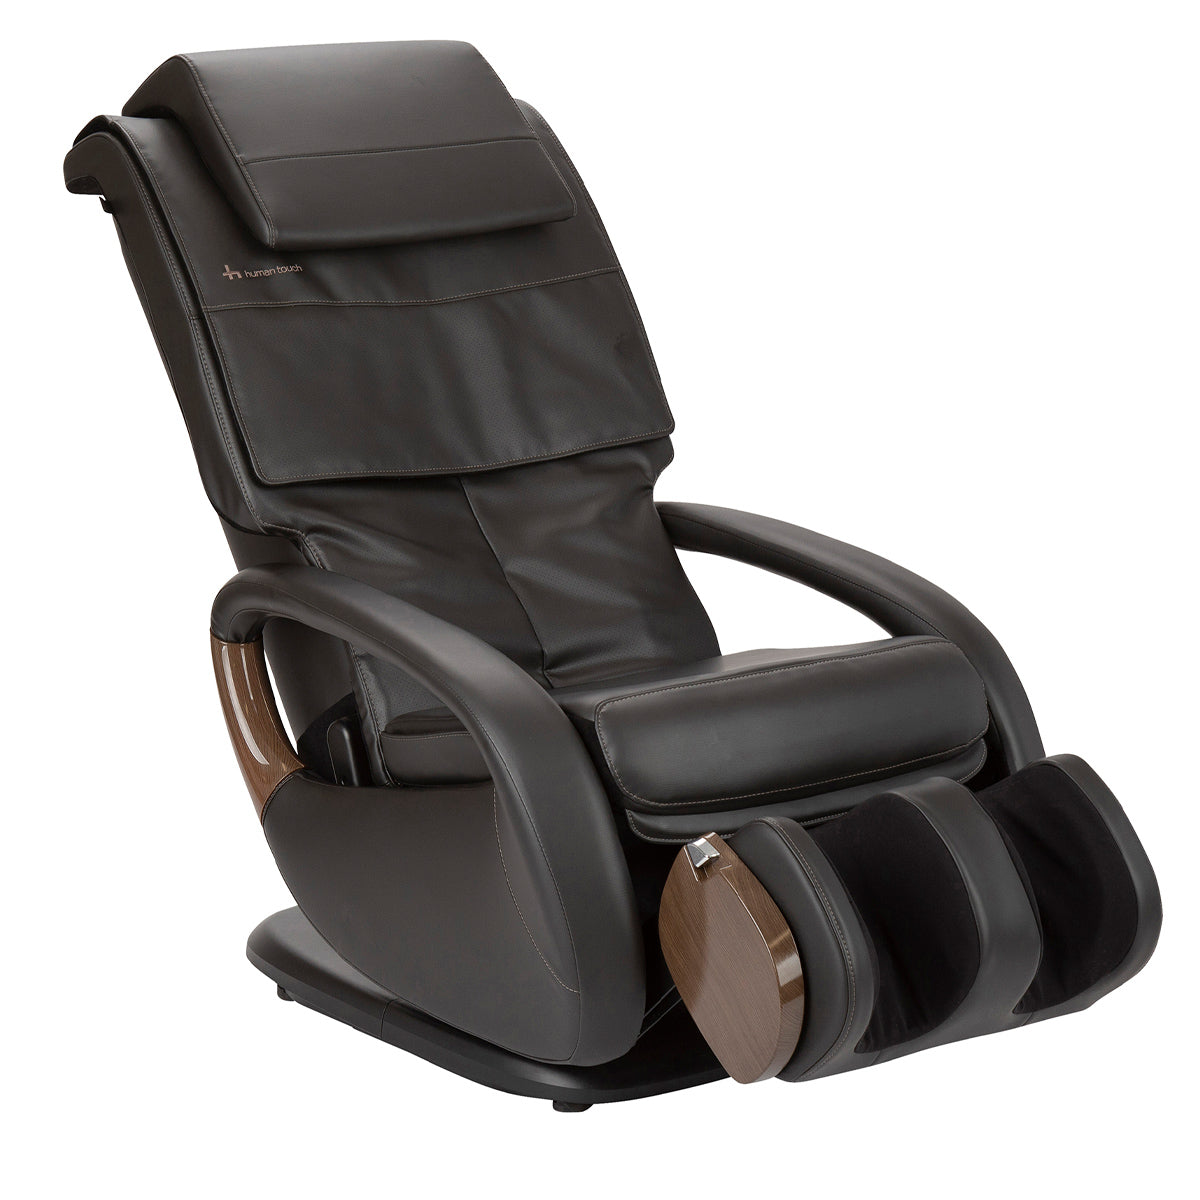 Human Touch WholeBody 8.0 Massage Chair Massage Chair Human Touch   